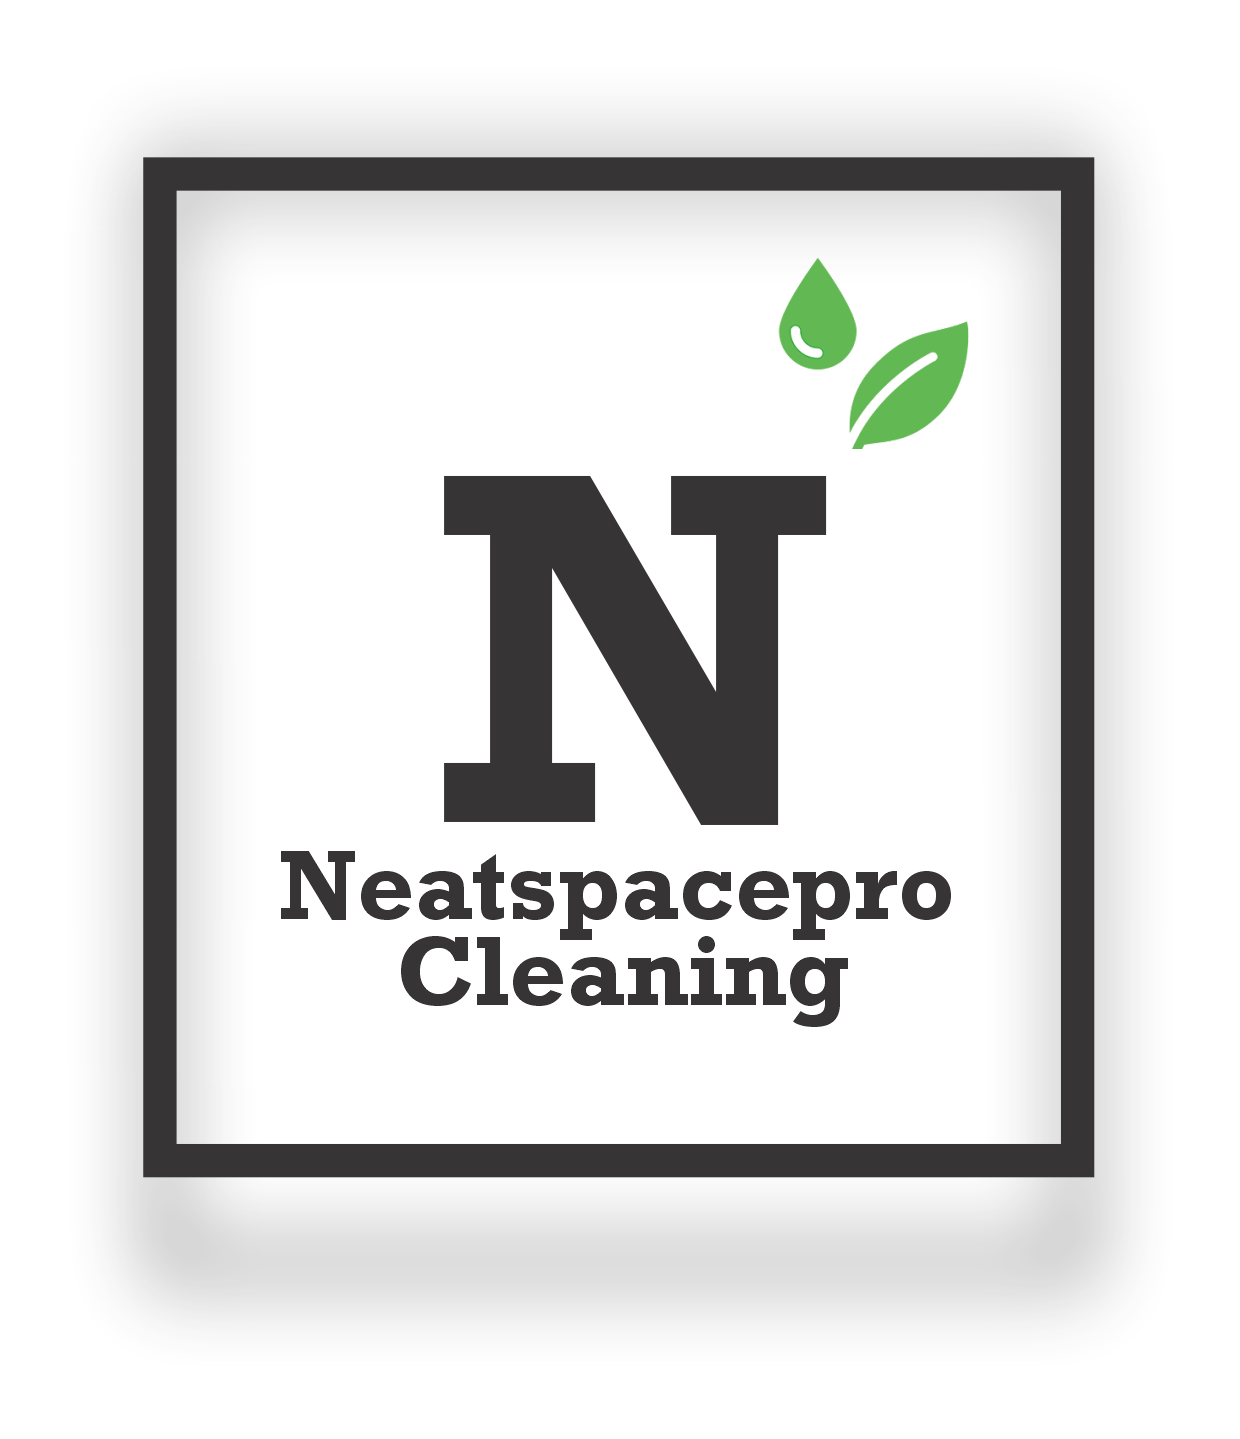 Neatspacepro Cleaning Services